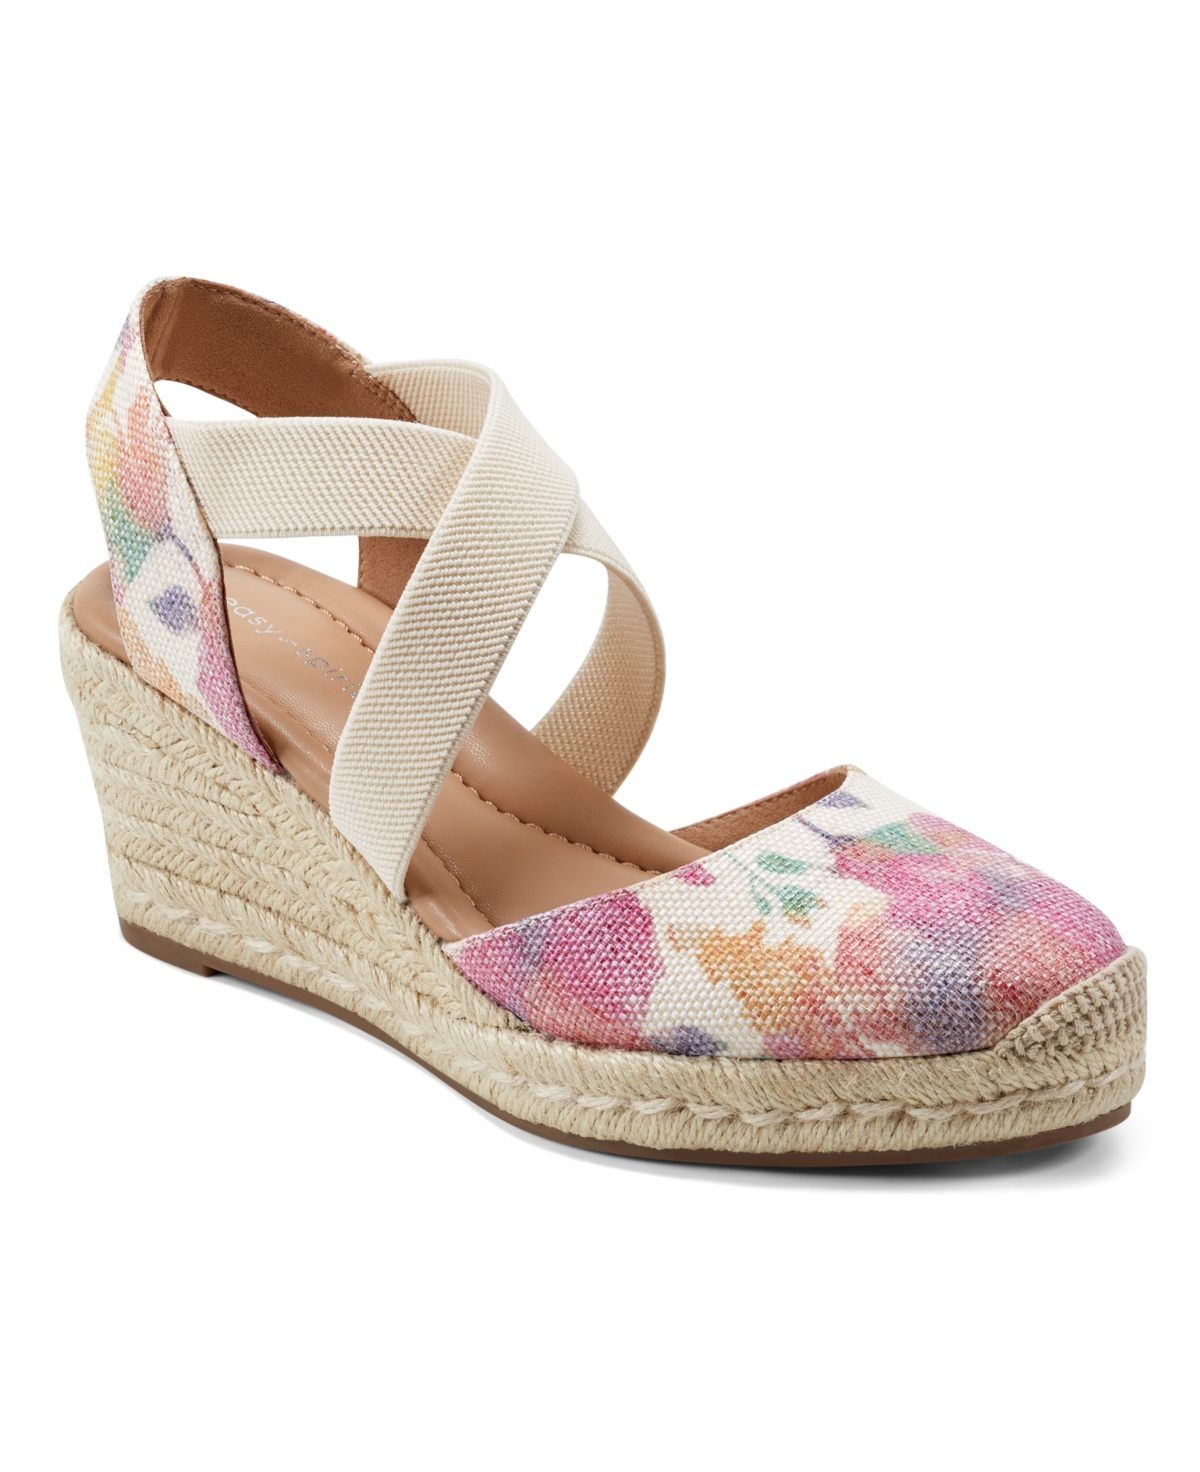 Easy Spirit Women's Meza Casual Strappy Espadrille Wedges Sandal In Ivory,pink Floral Multi- Manmade,texti